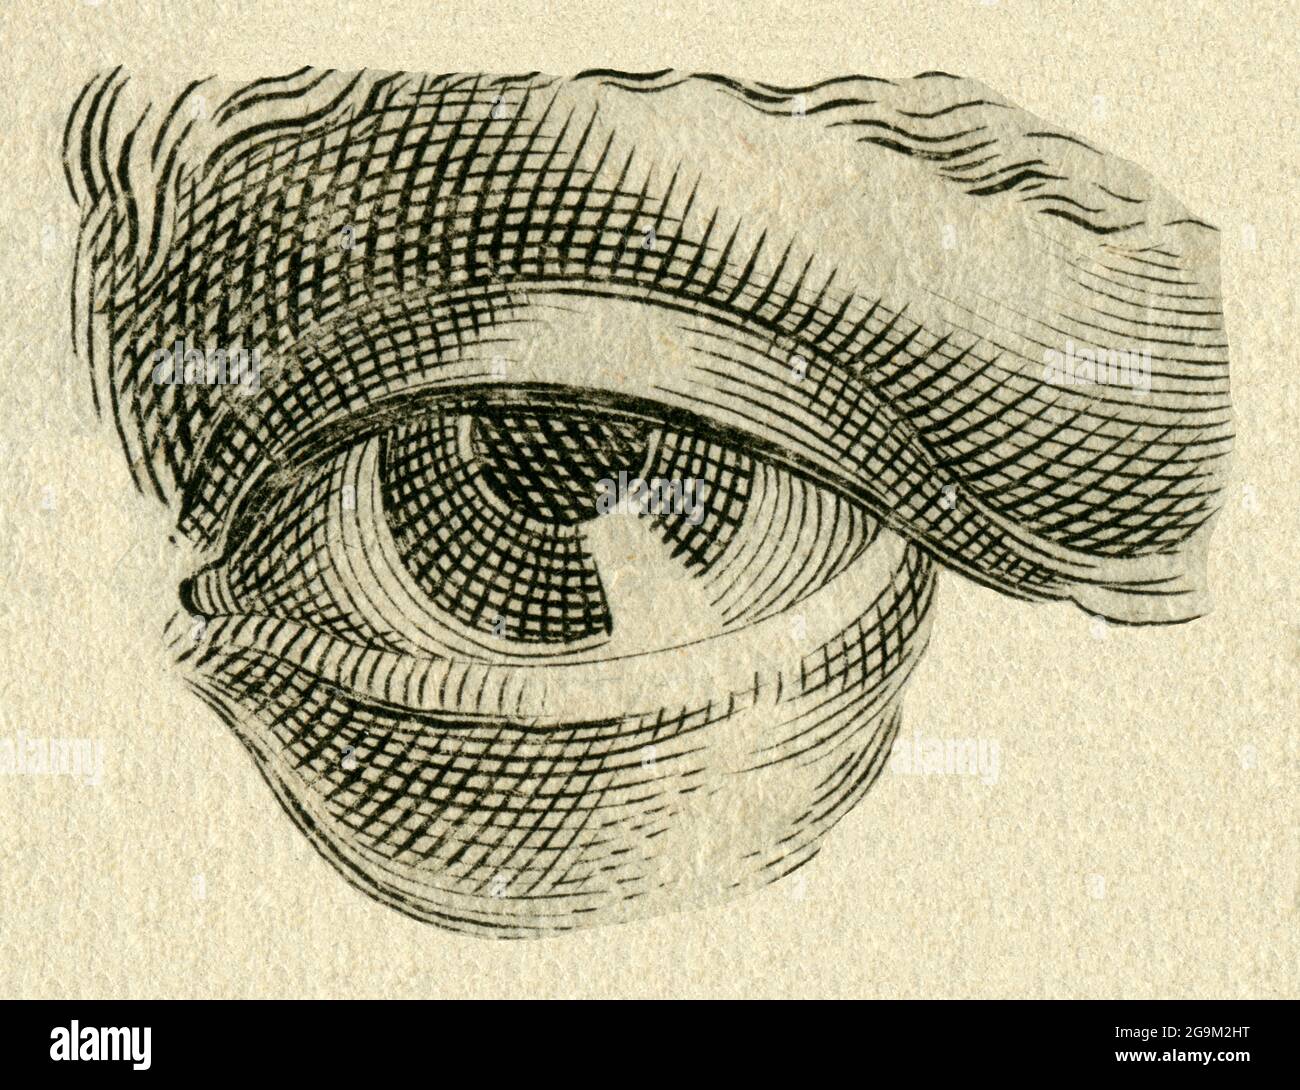 Europe, body support " the Eye", artist unknown, copperplate engraving, around 1700 , ARTIST'S COPYRIGHT HAS NOT TO BE CLEARED Stock Photo